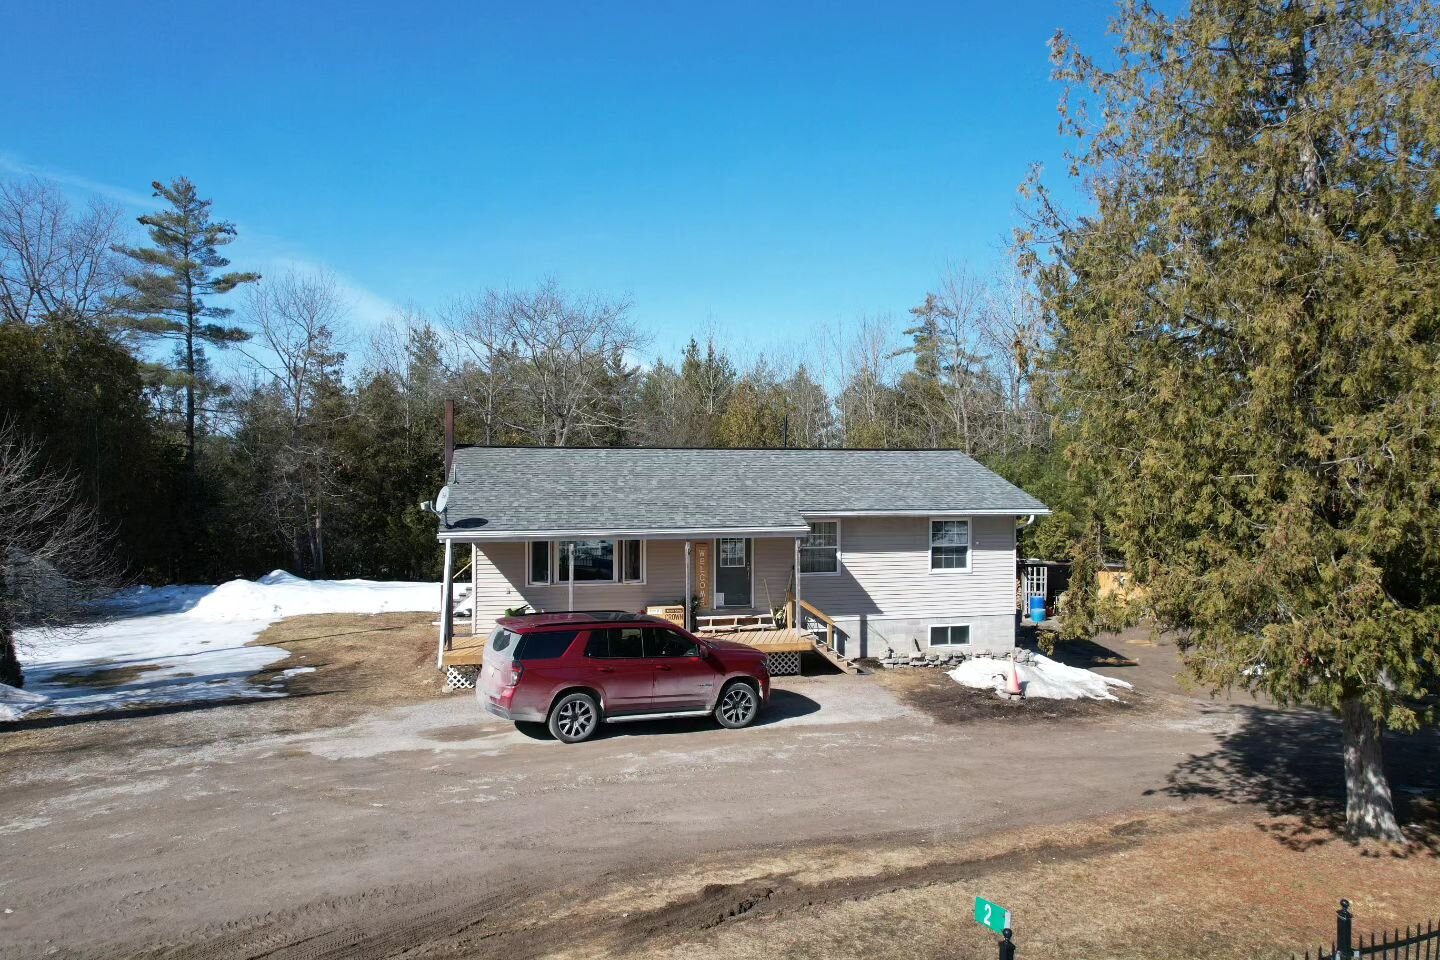 Custom built in 2000, this 1230sqft raised bungalow with partially finished walk-out basement offers idyllic country charm with in-town convenience.

2 Vivi Street, Coboconk
$579,000